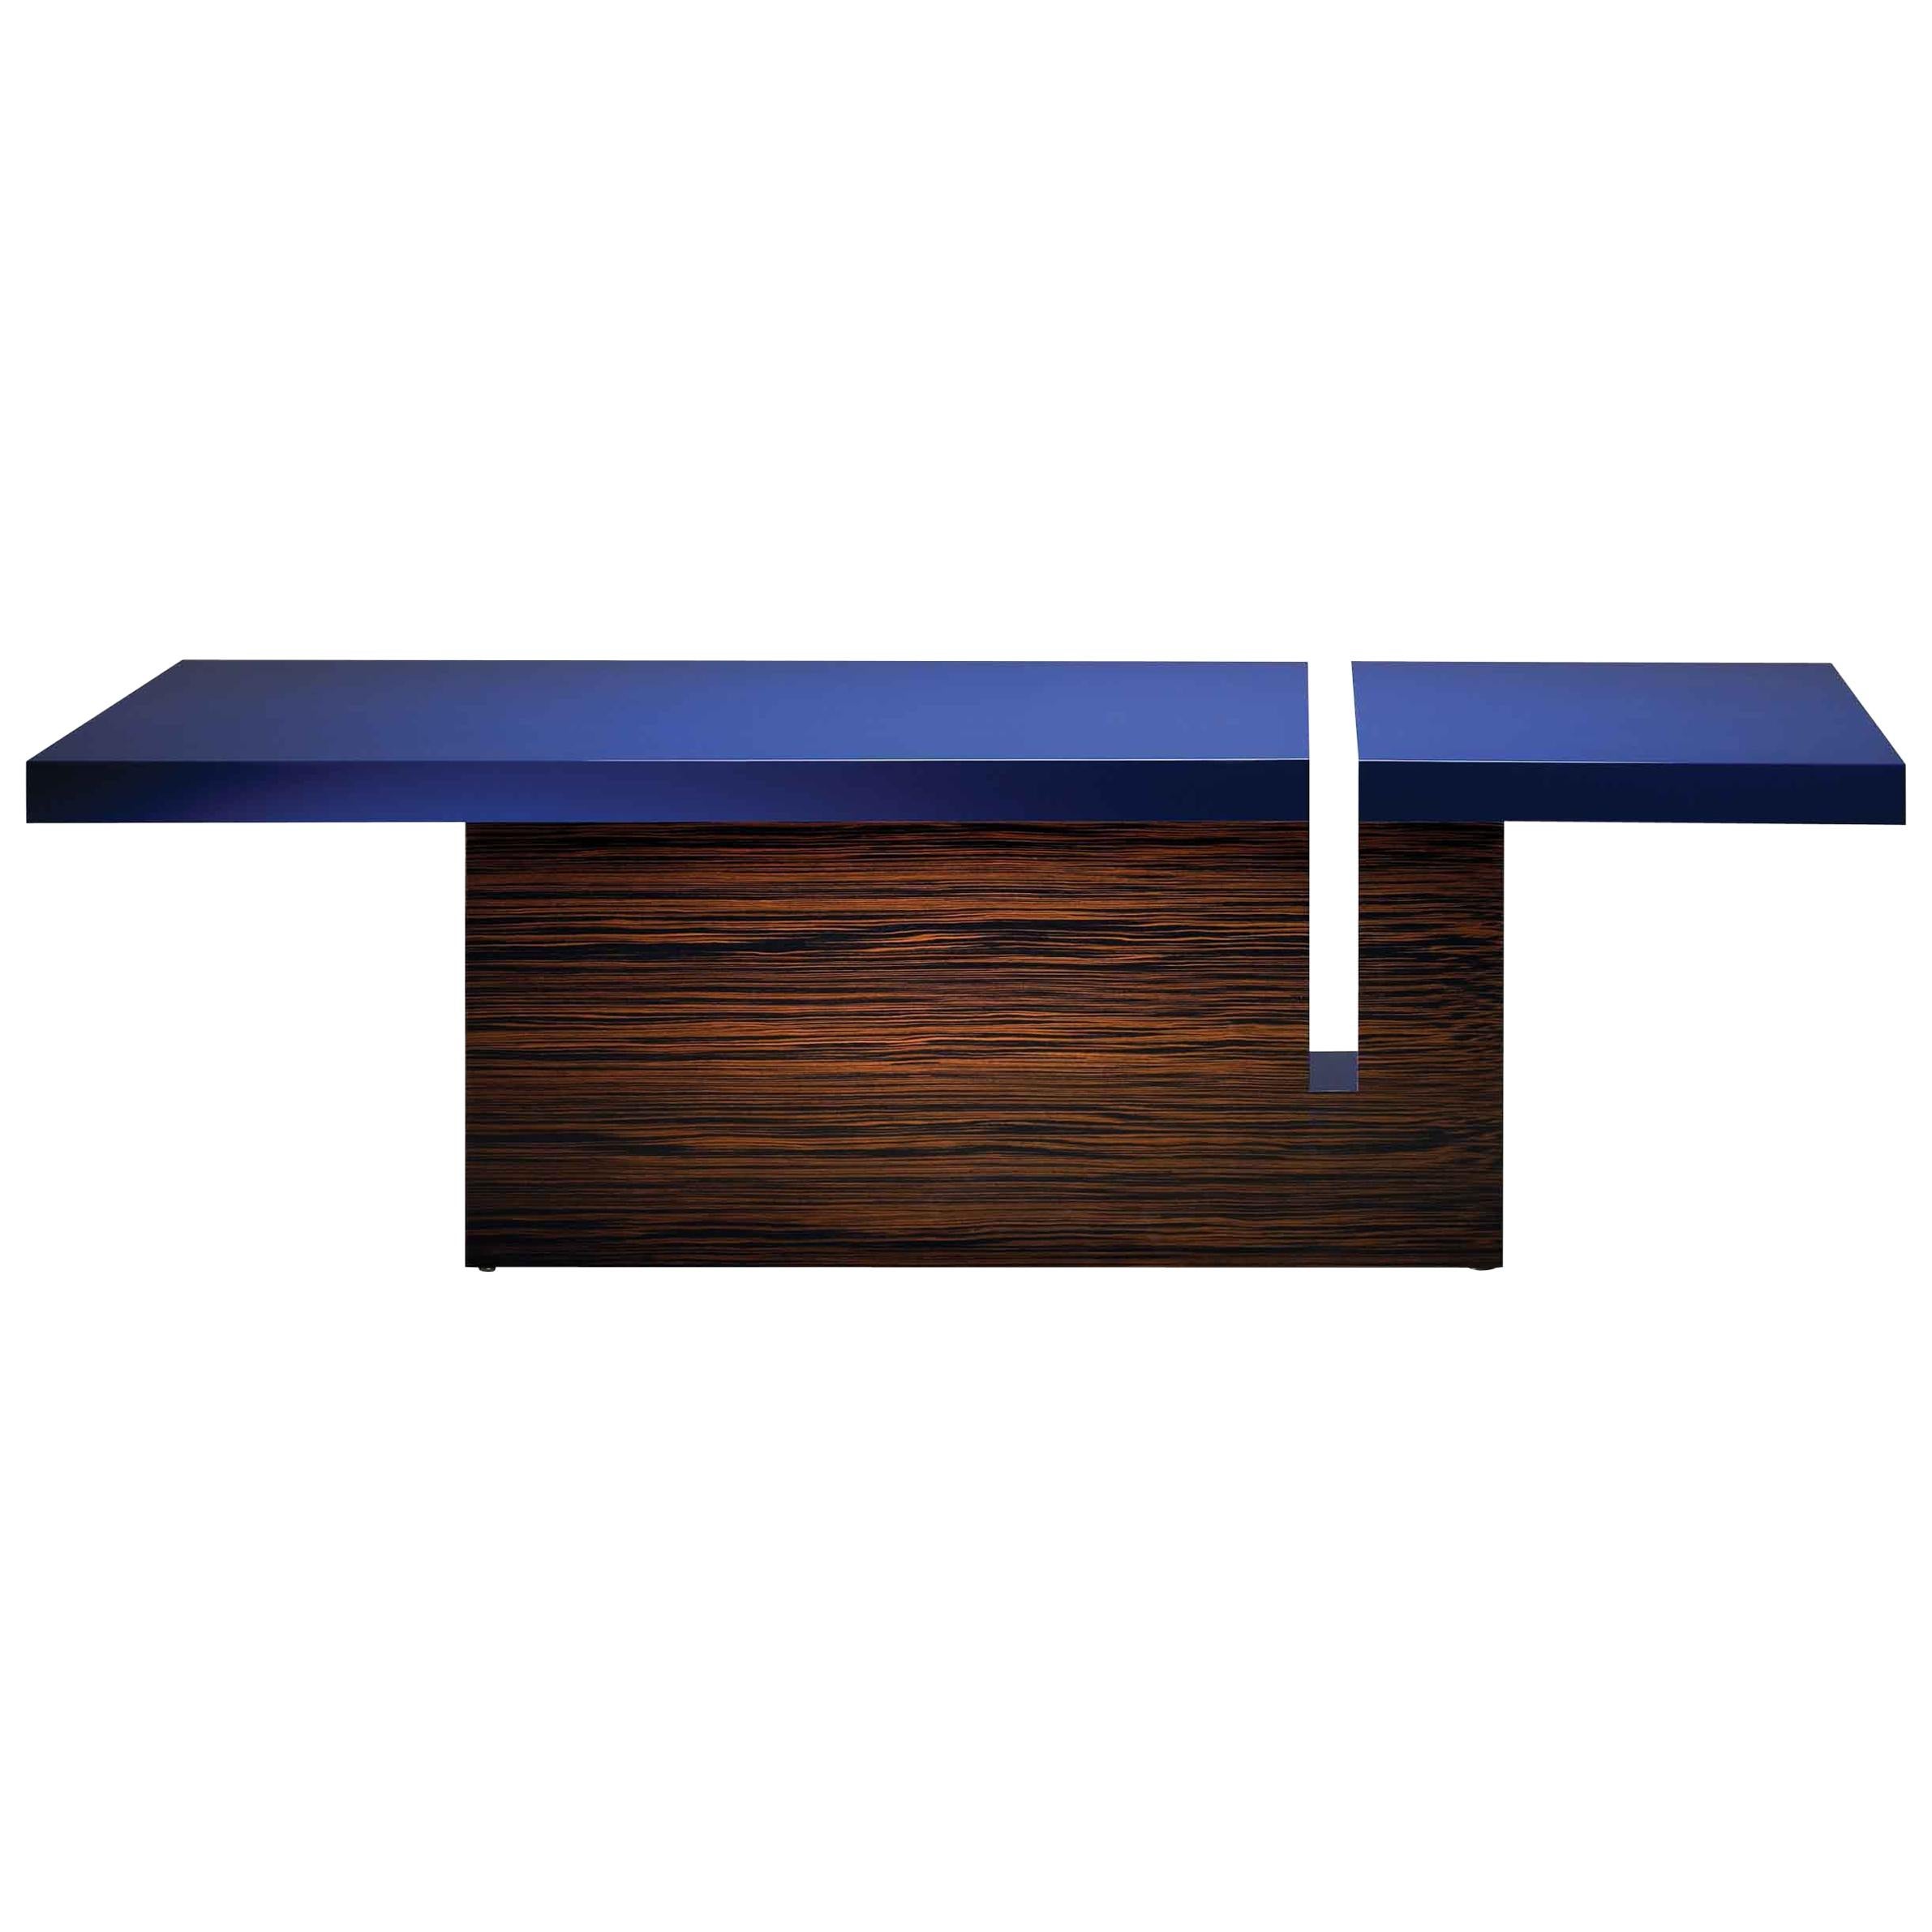 Off Inn Klein Contemporary and Customizable Dining Table by Luísa Peixoto For Sale